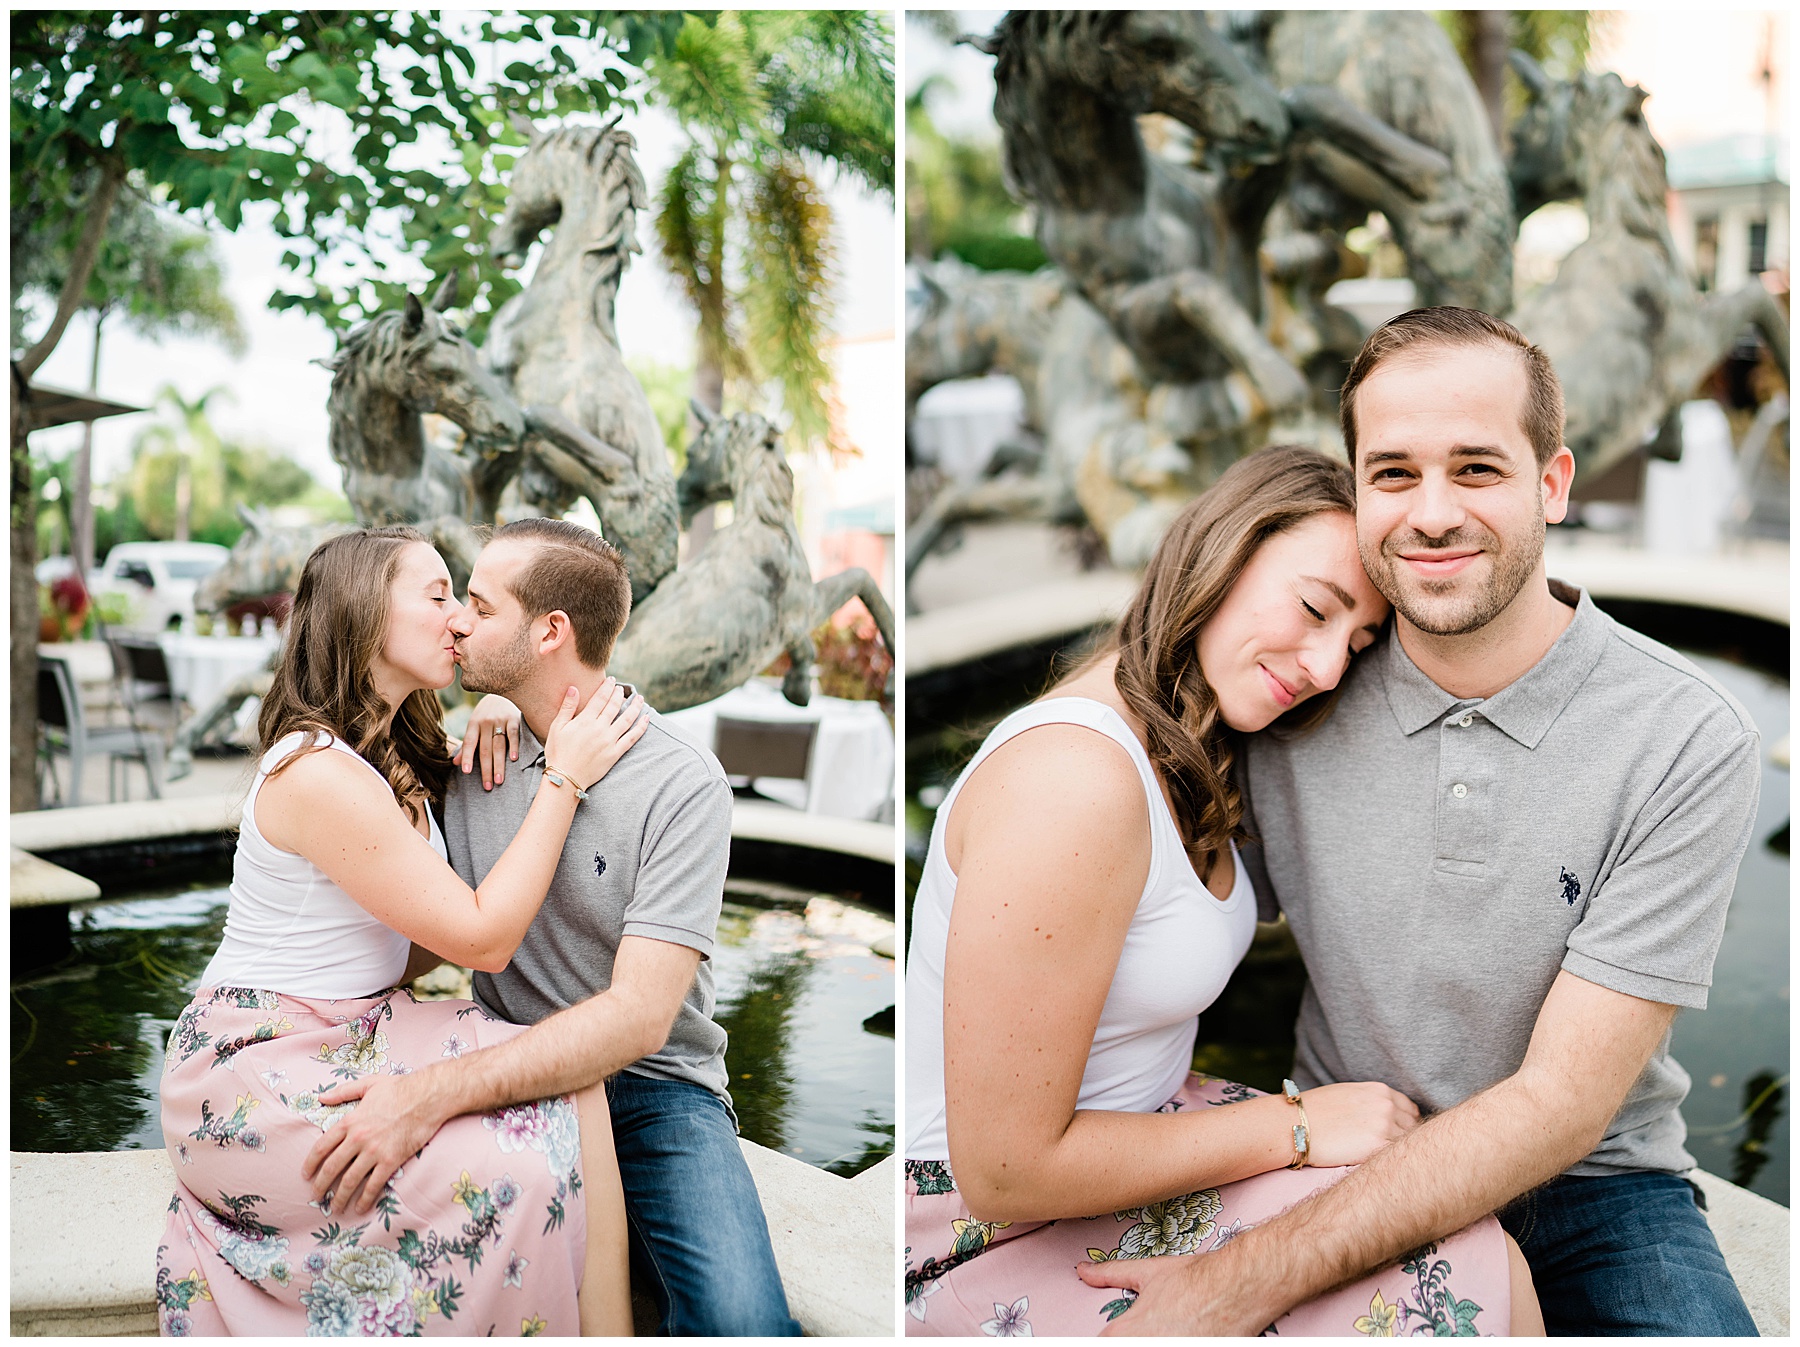 Newly engaged couple snuggle and kiss in front of a fountain for their Naples Engagement photo shoot.